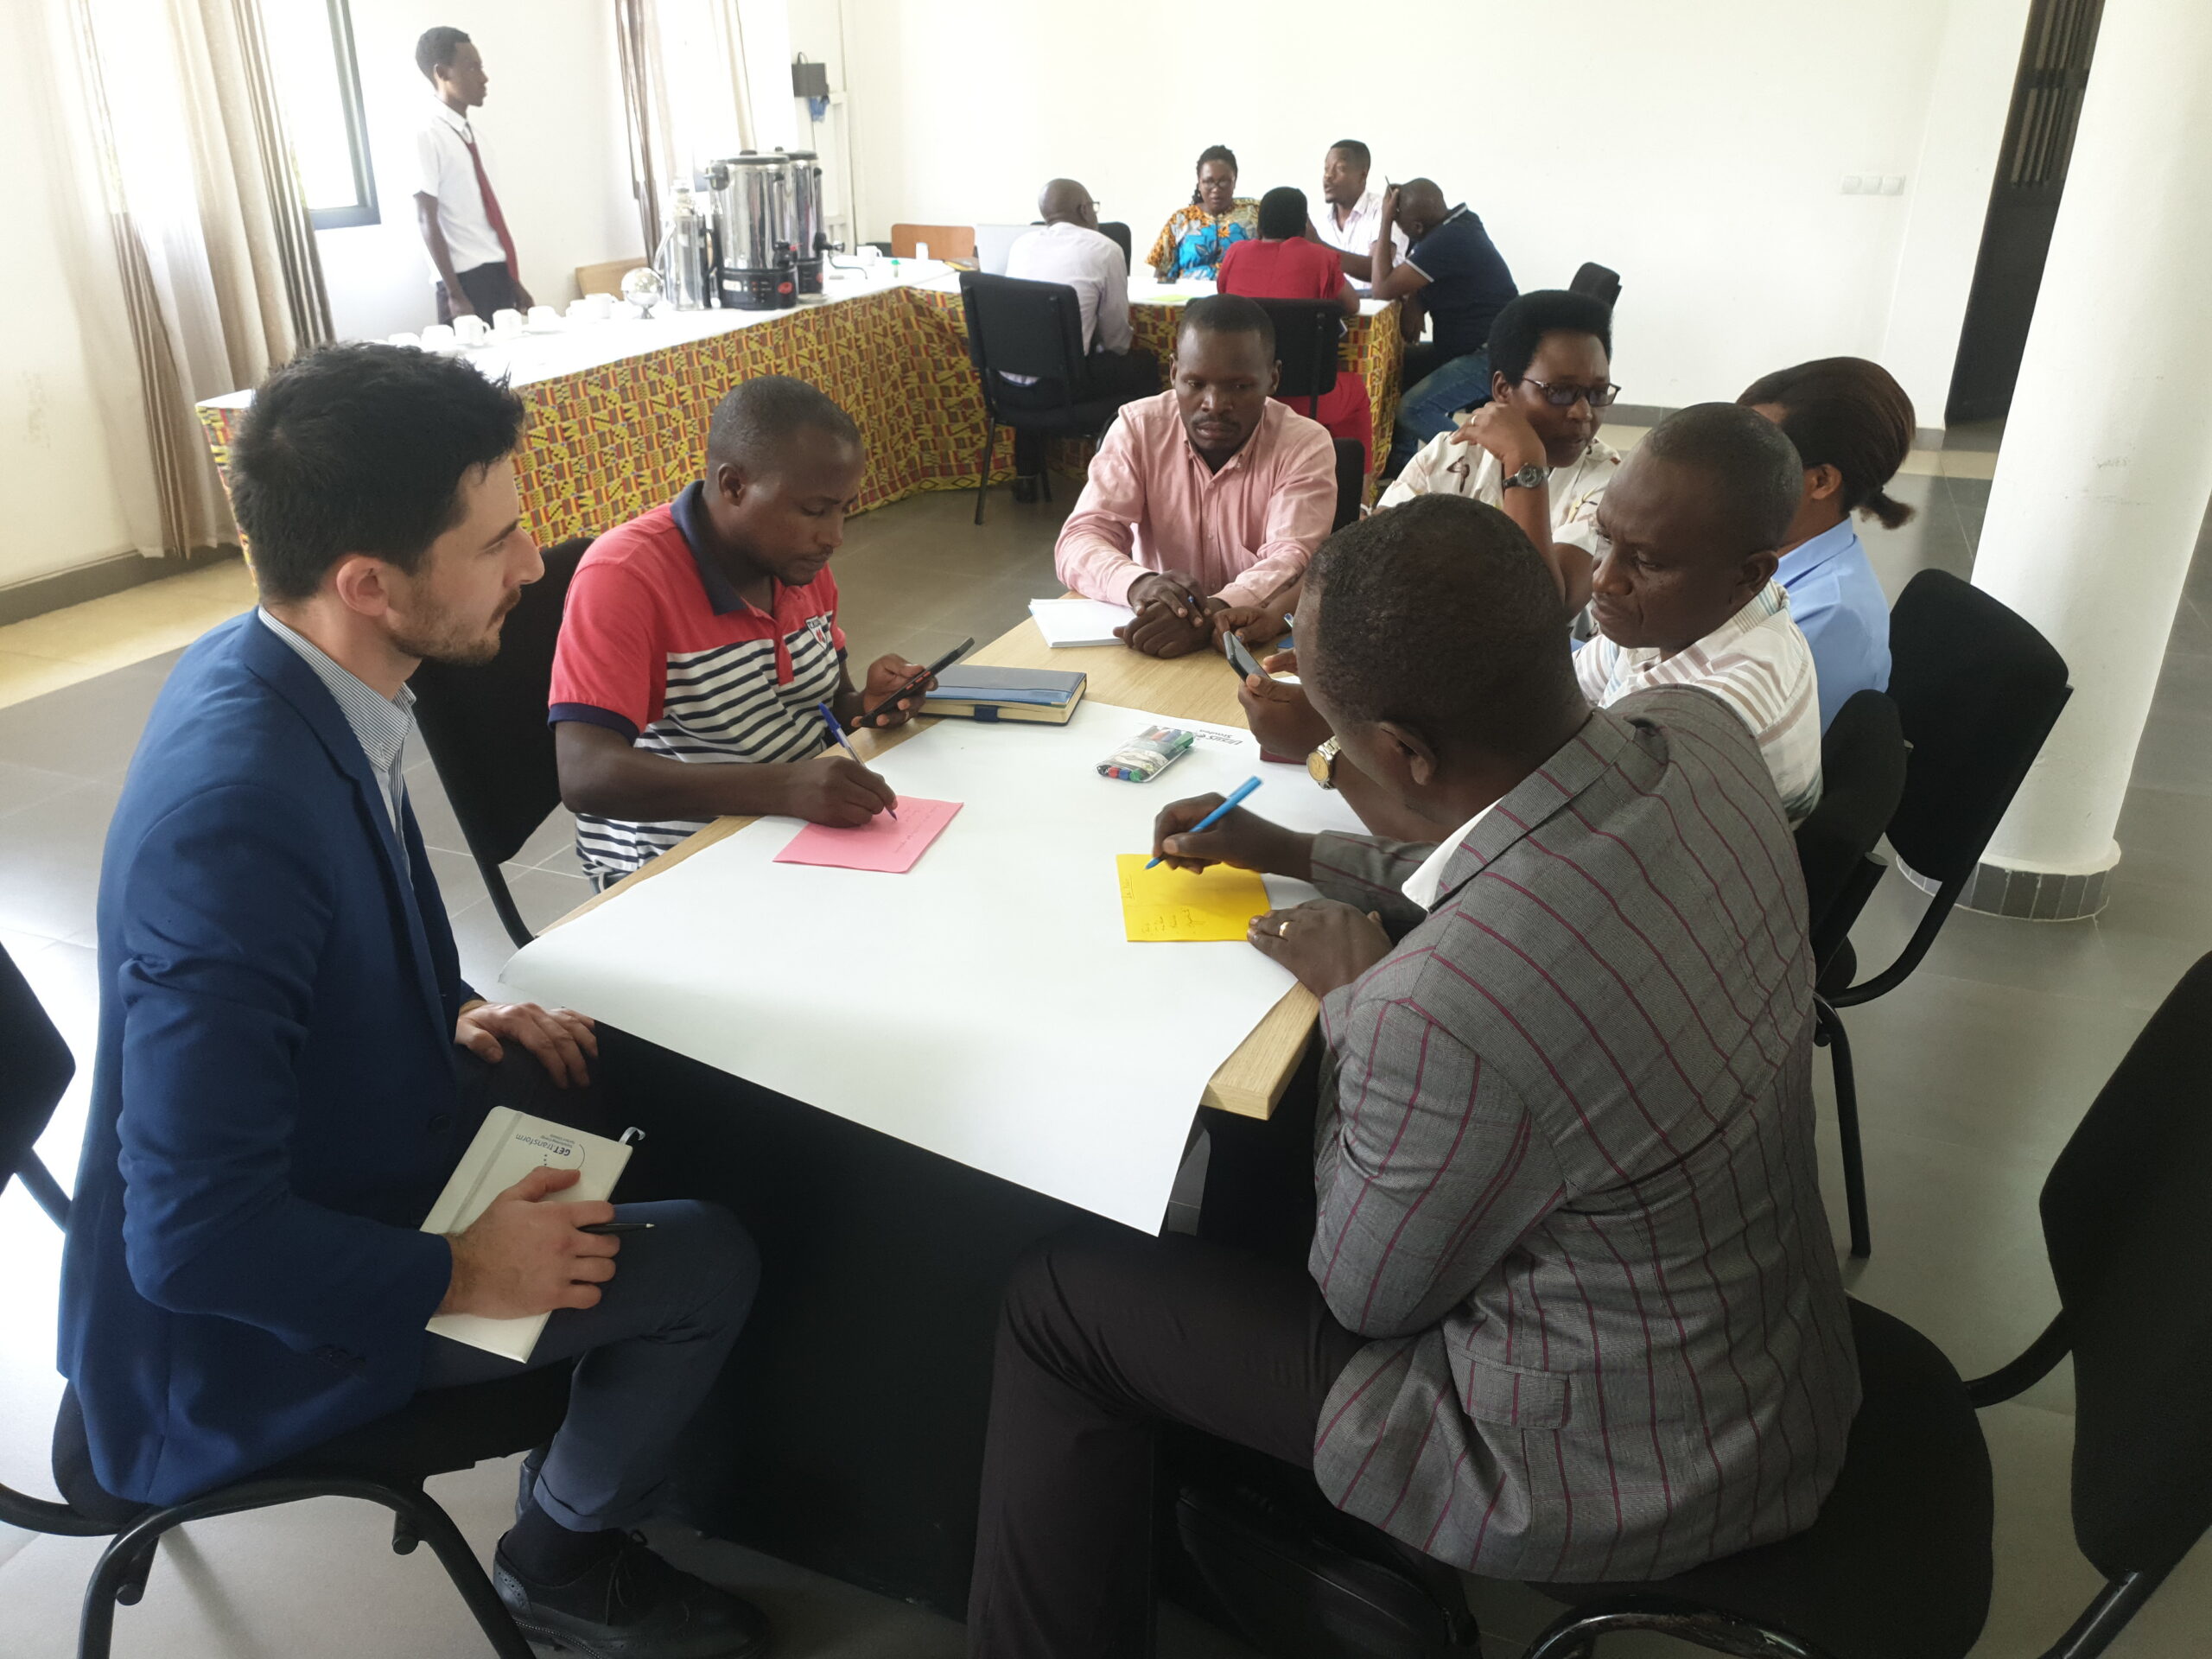 Exchange in groups at public sector training by GET.invest and GET.transform in Burundi, March 2023